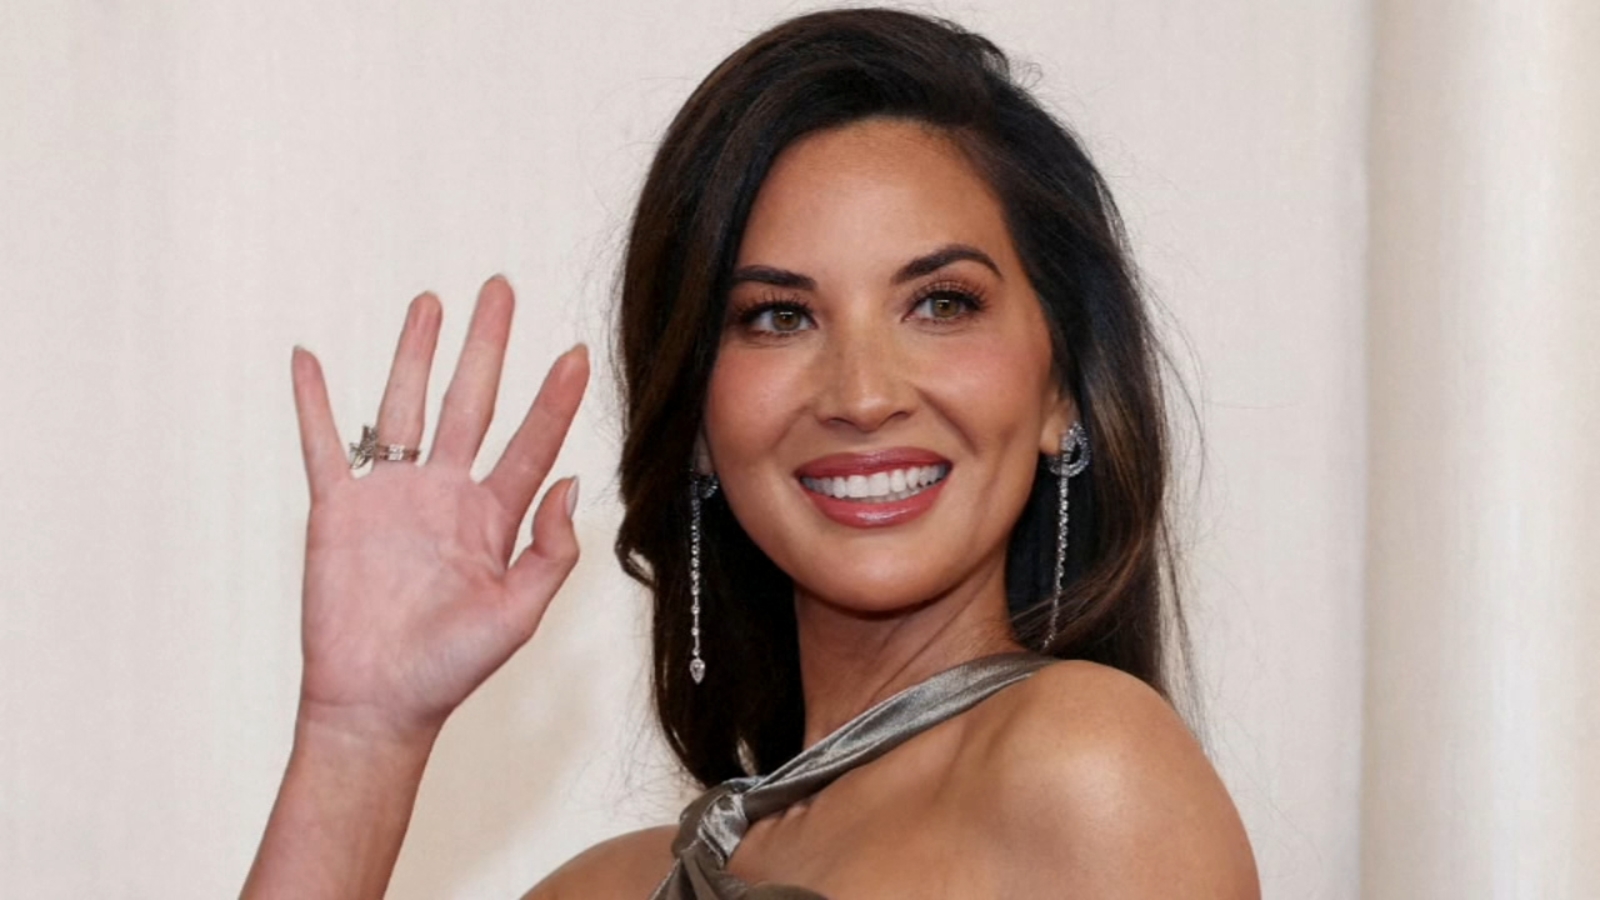 Olivia Munn shares she had full hysterectomy just months after revealing double mastectomy, luminal b breast cancer diagnosis [Video]